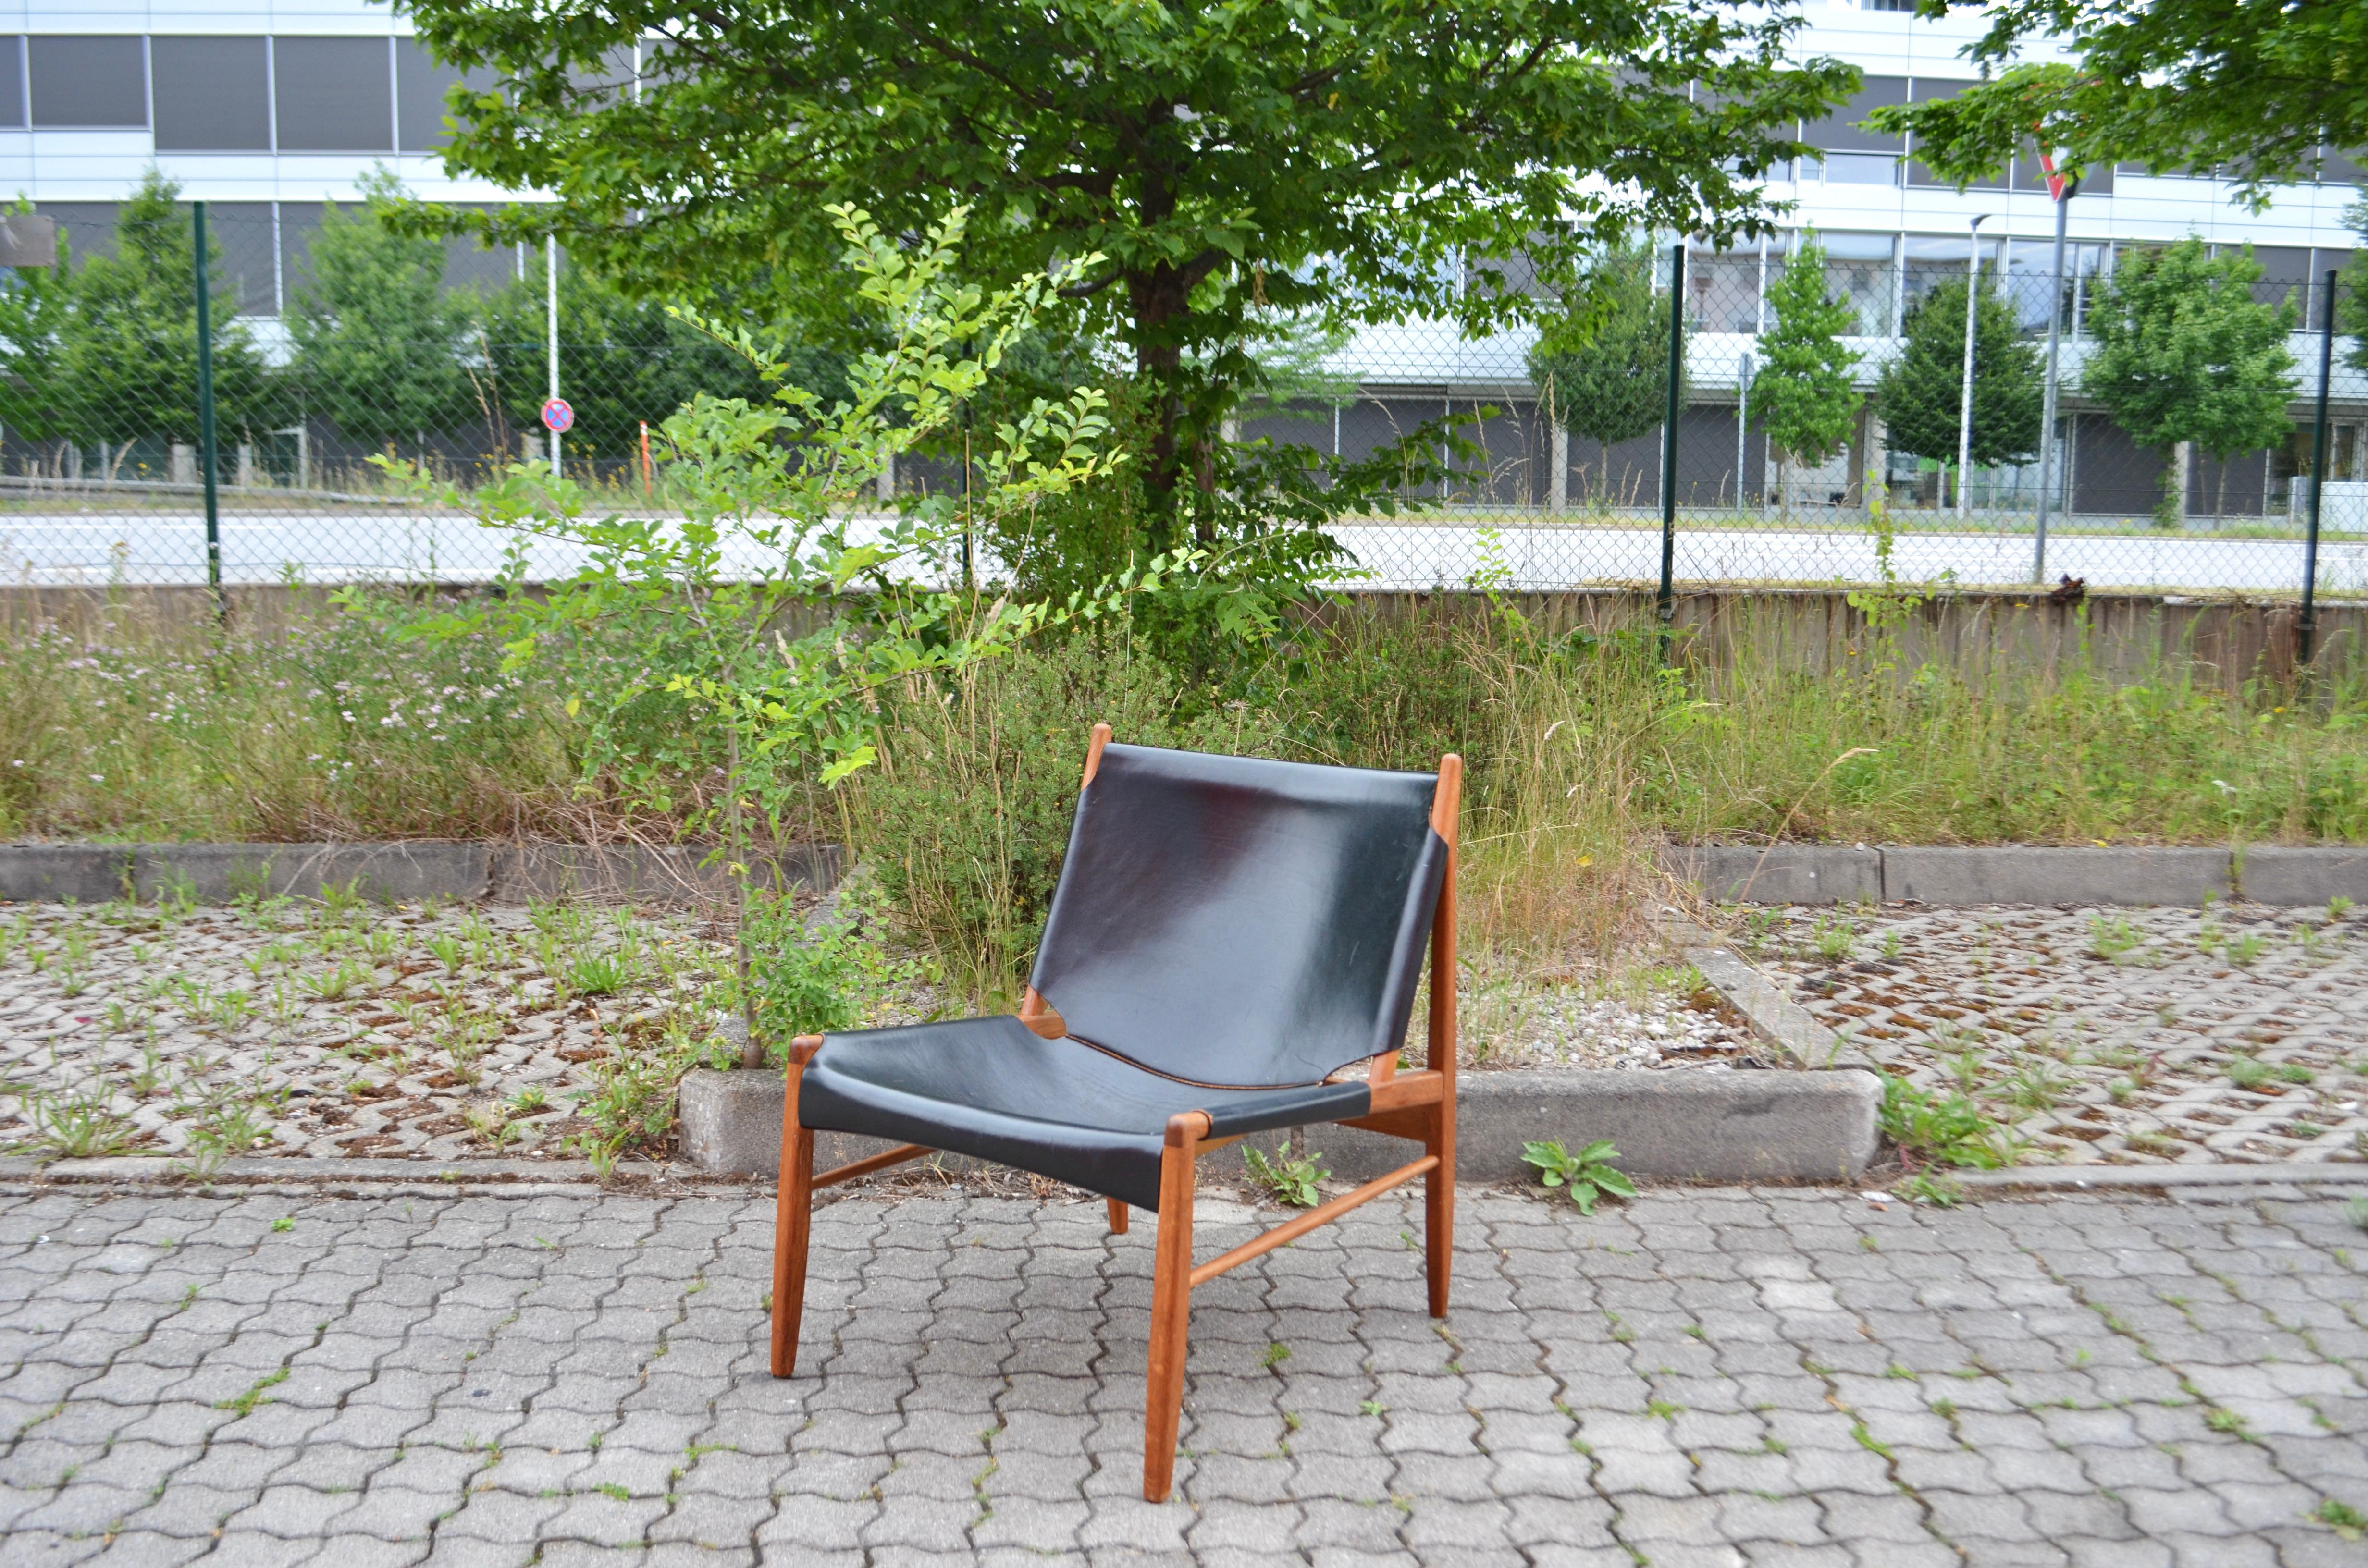 This Lounge chair was designed 1958 by Franz Xaver Lutz for Deutsche Werkstätten WK Möbel.
The model name is 1192 and also known as Chimney chair.
Made in black saddle leather and oiled oak.
The leather has some wears and patina.
This is one of